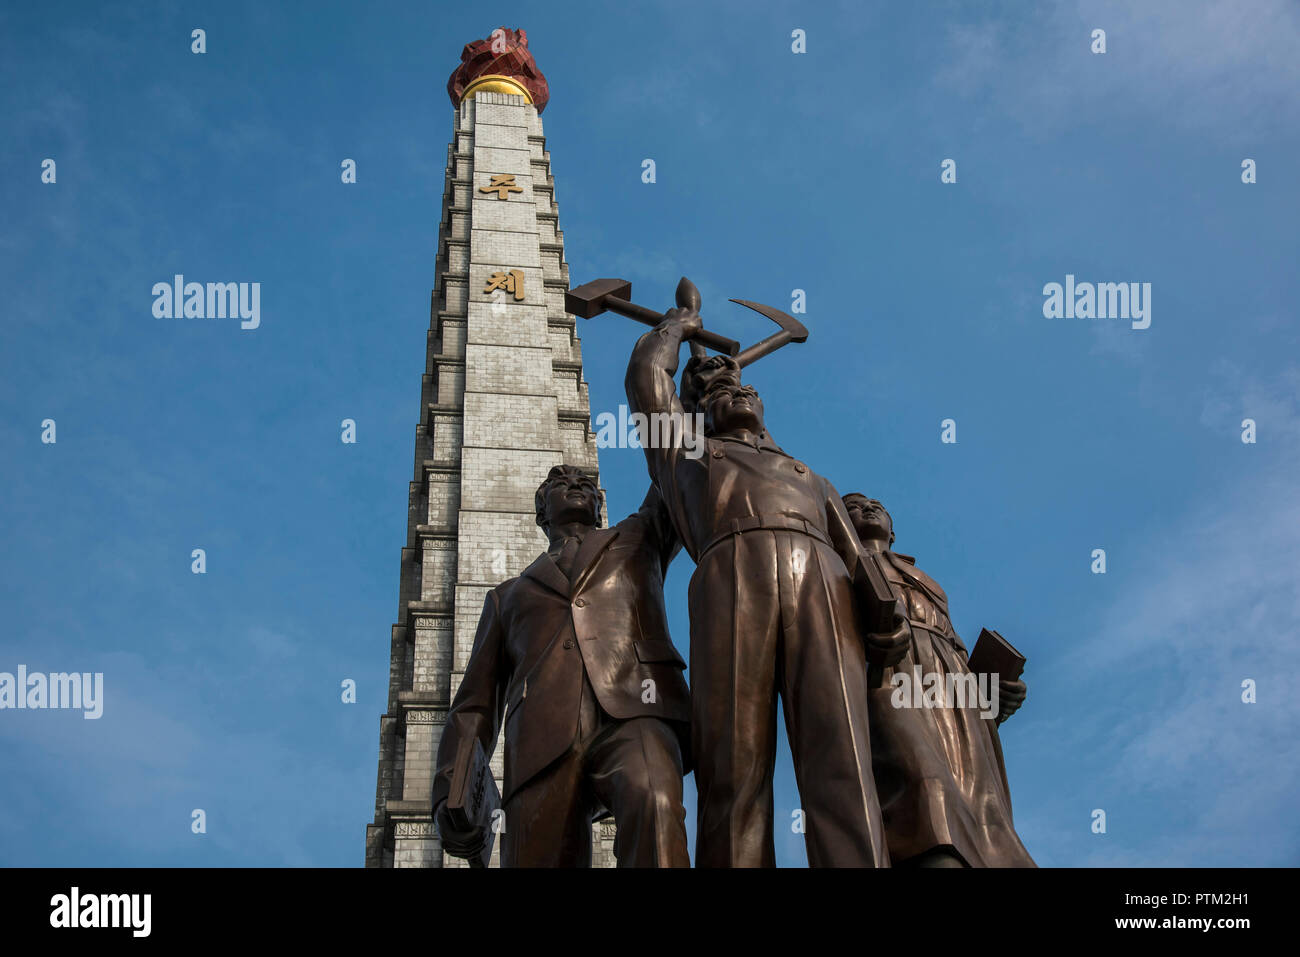 Communist revolutionary statue by the Juche Tower in Pyongyang in North Korea. Stock Photo